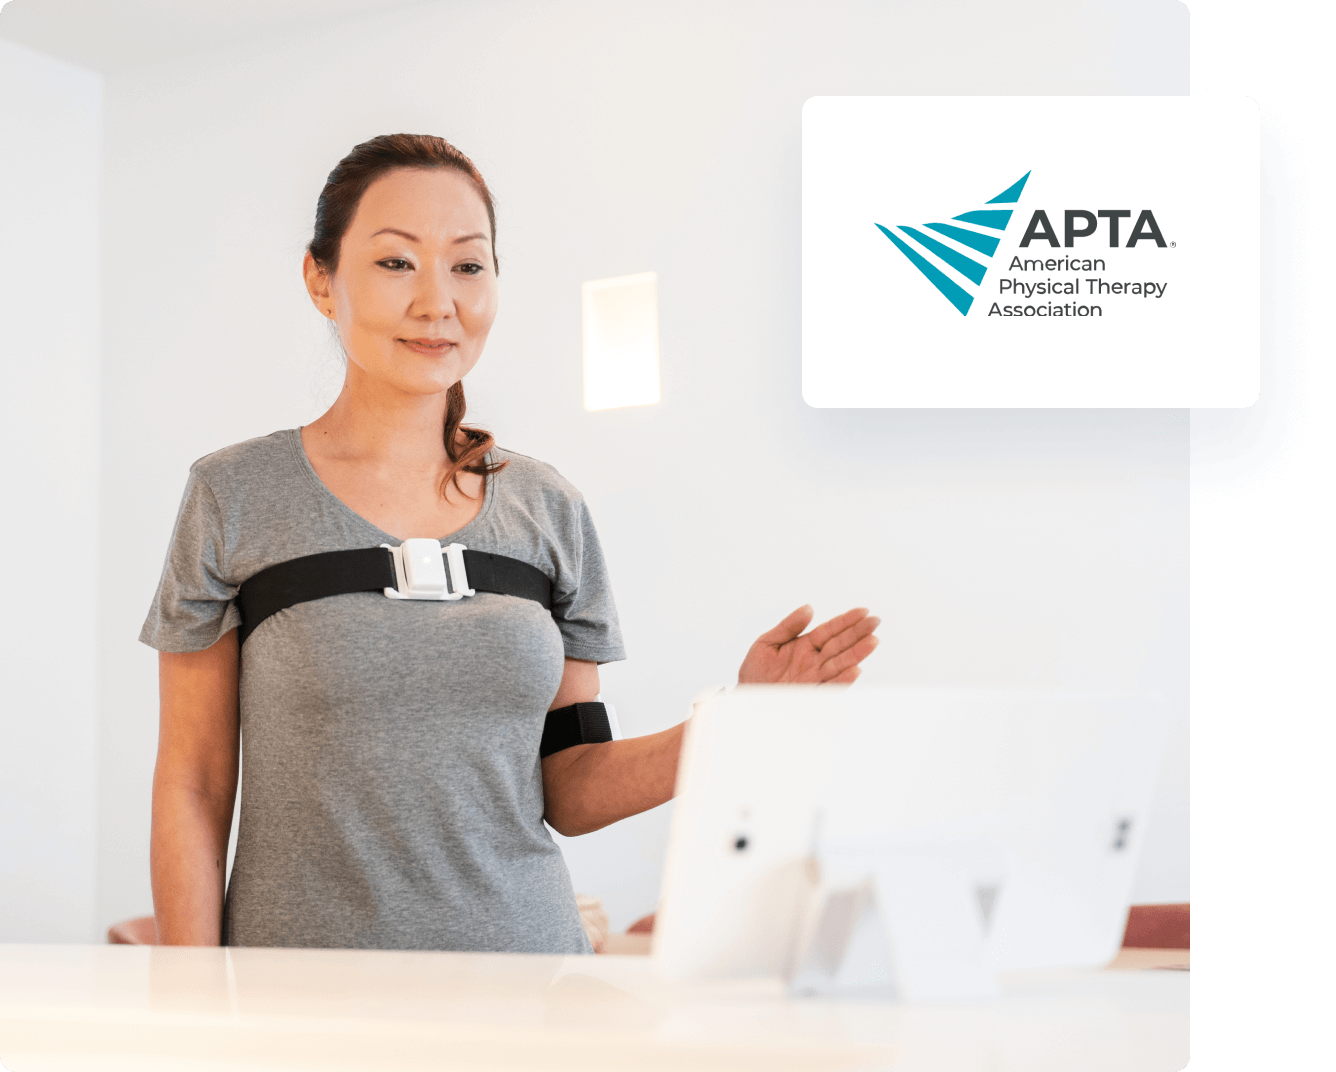 Partnering with the American Physical Therapy Association (APTA)